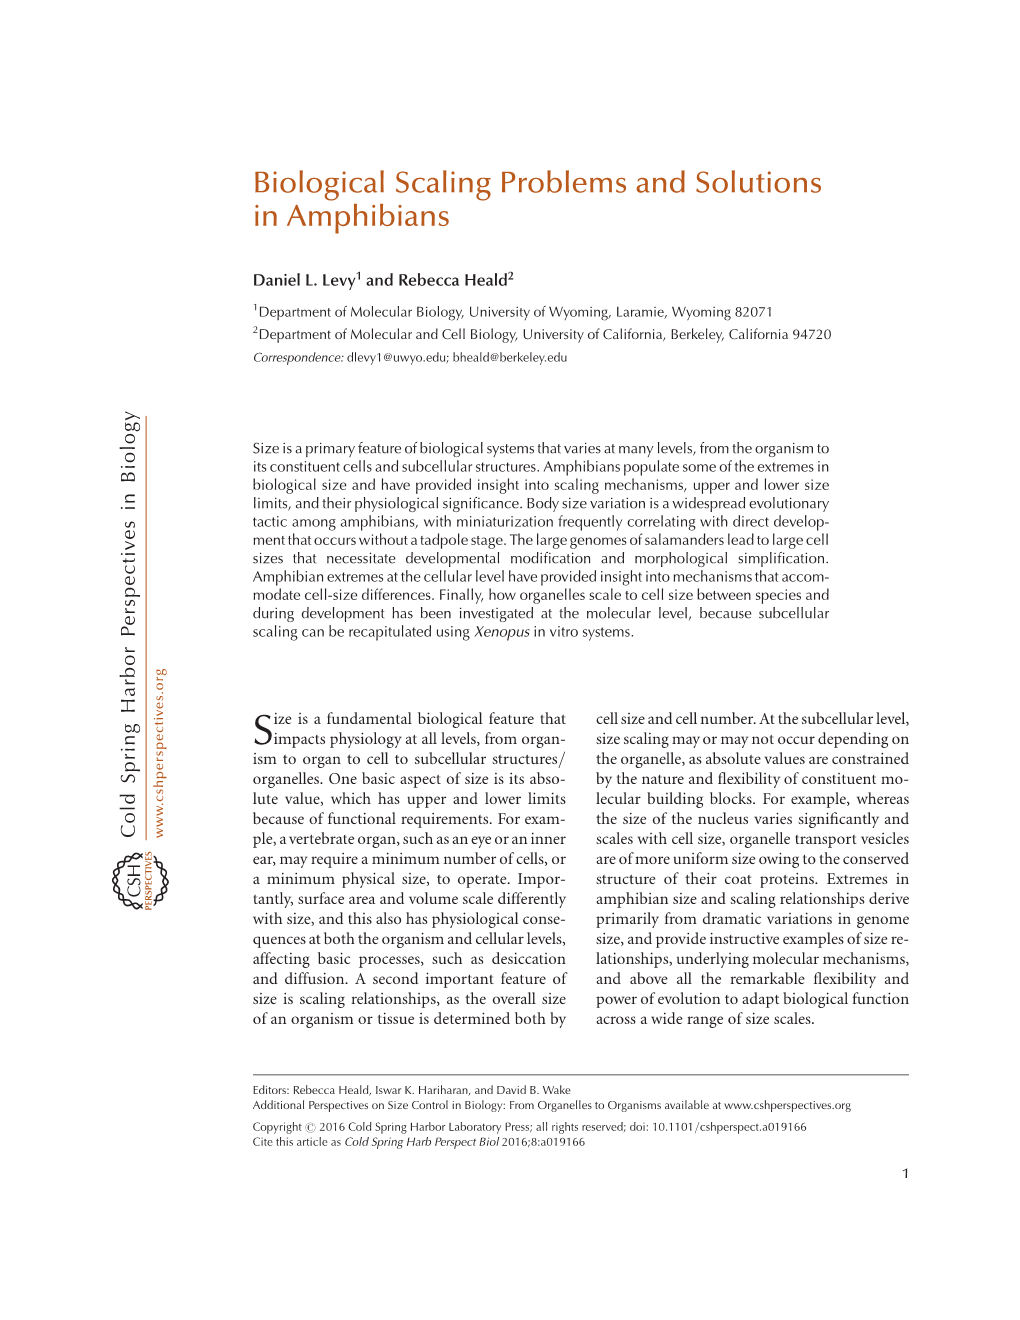 Biological Scaling Problems and Solutions in Amphibians